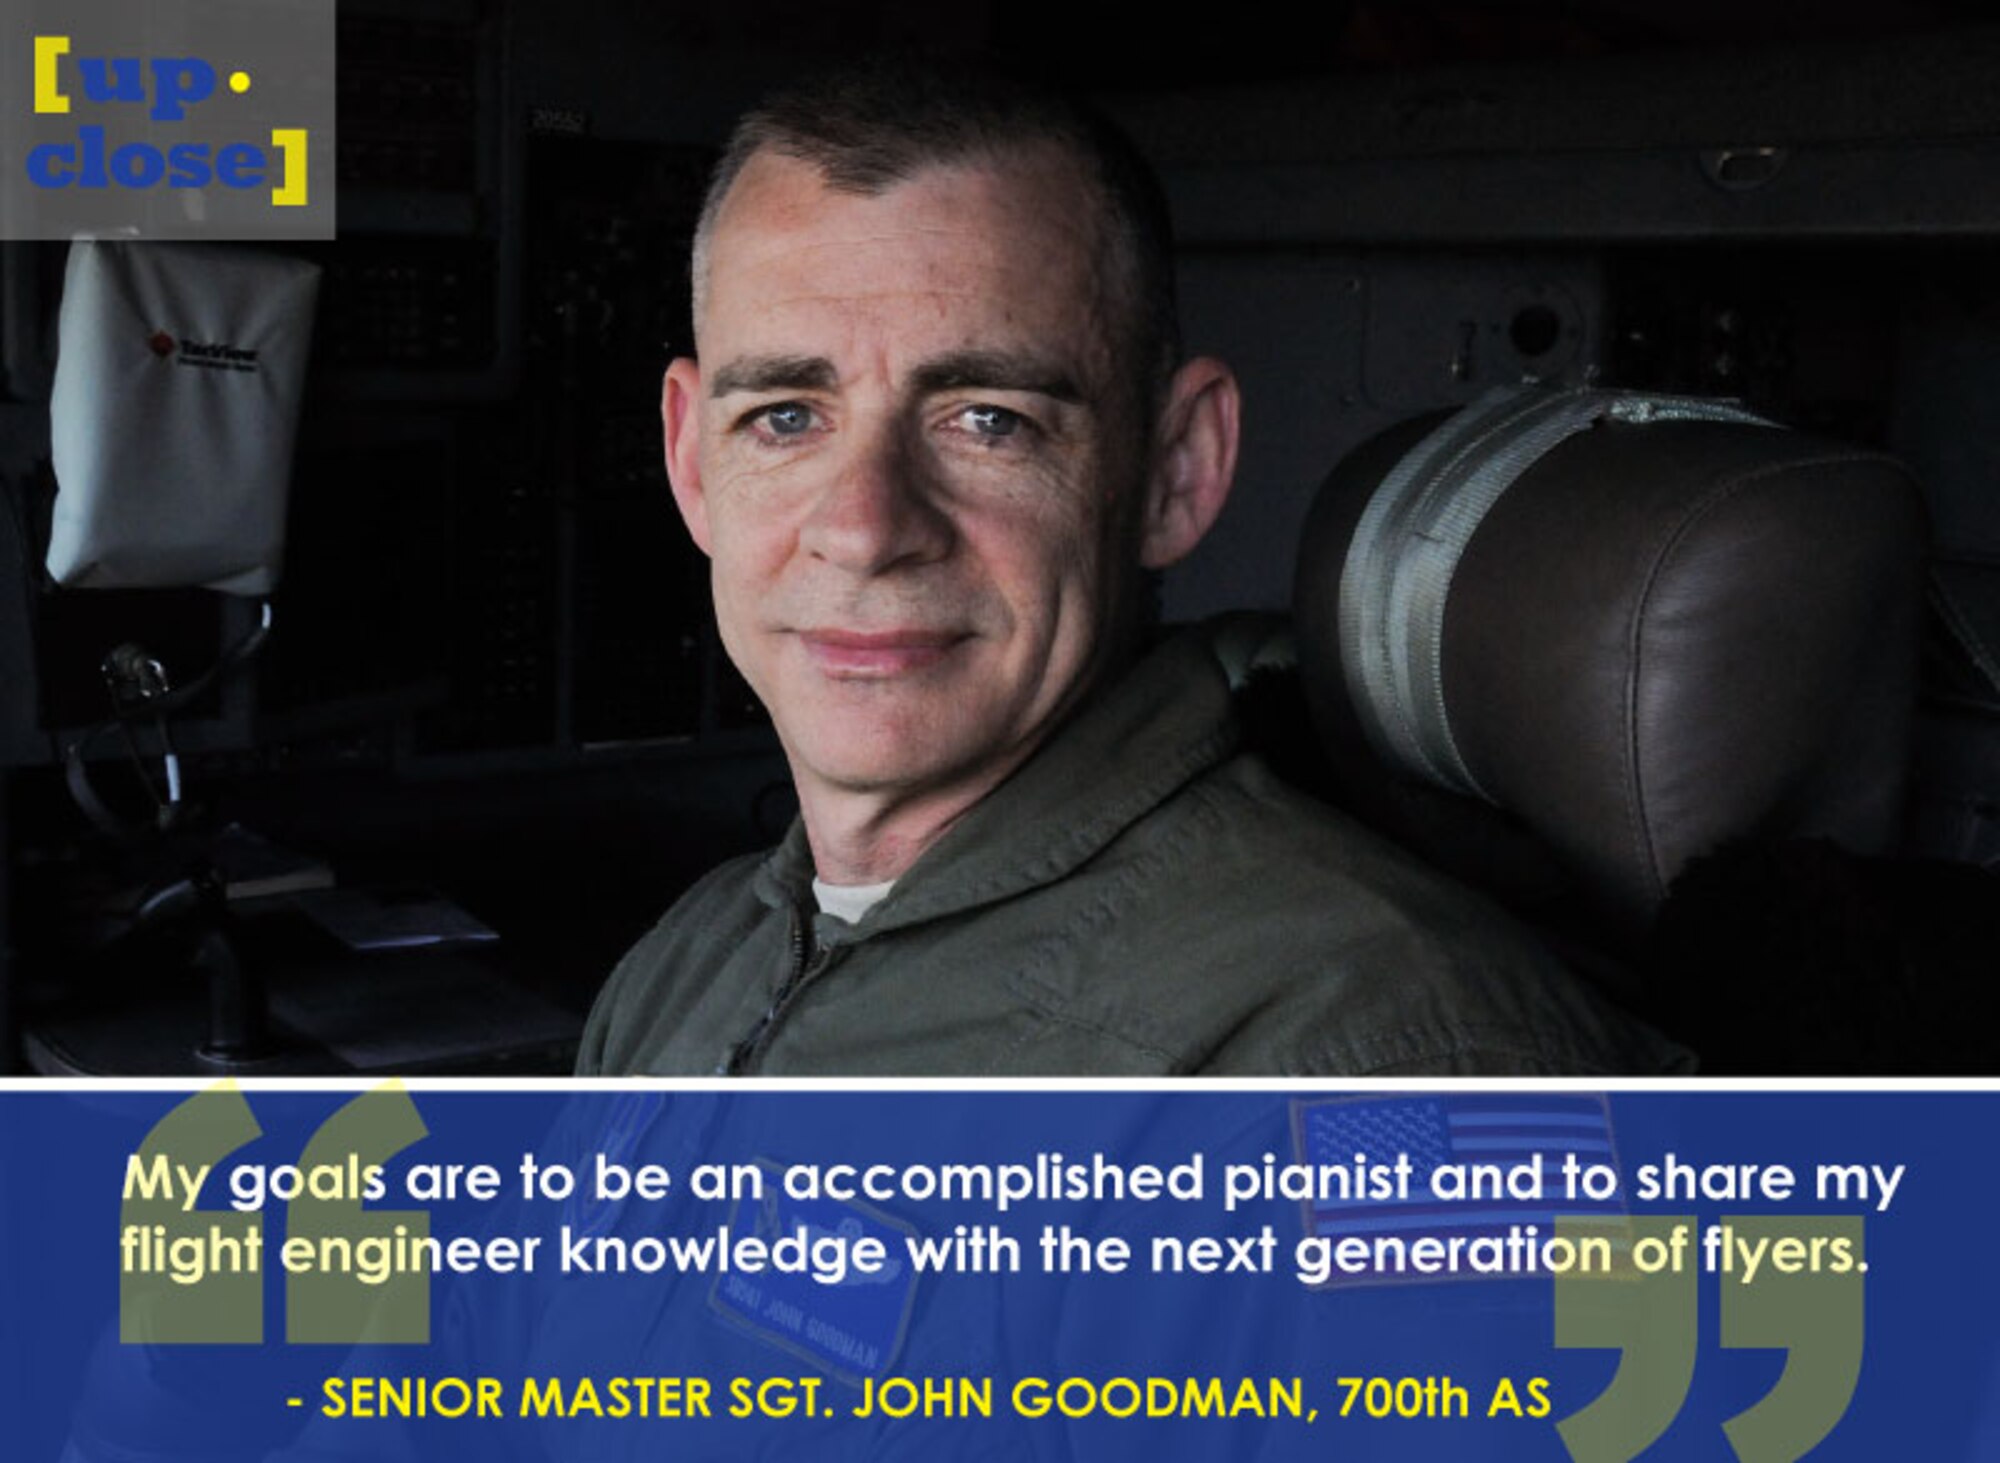 This week’s Up Close features Senior Master Sgt. John Goodman, a 700th Airlift Squadron flight engineer. Up Close is a series spotlighting individuals around Dobbins Air Reserve Base. (U.S. Air Force graphic/Staff Sgt. Andrew Park; U.S. Air Force photo/Senior Airman Justin Clayvon)